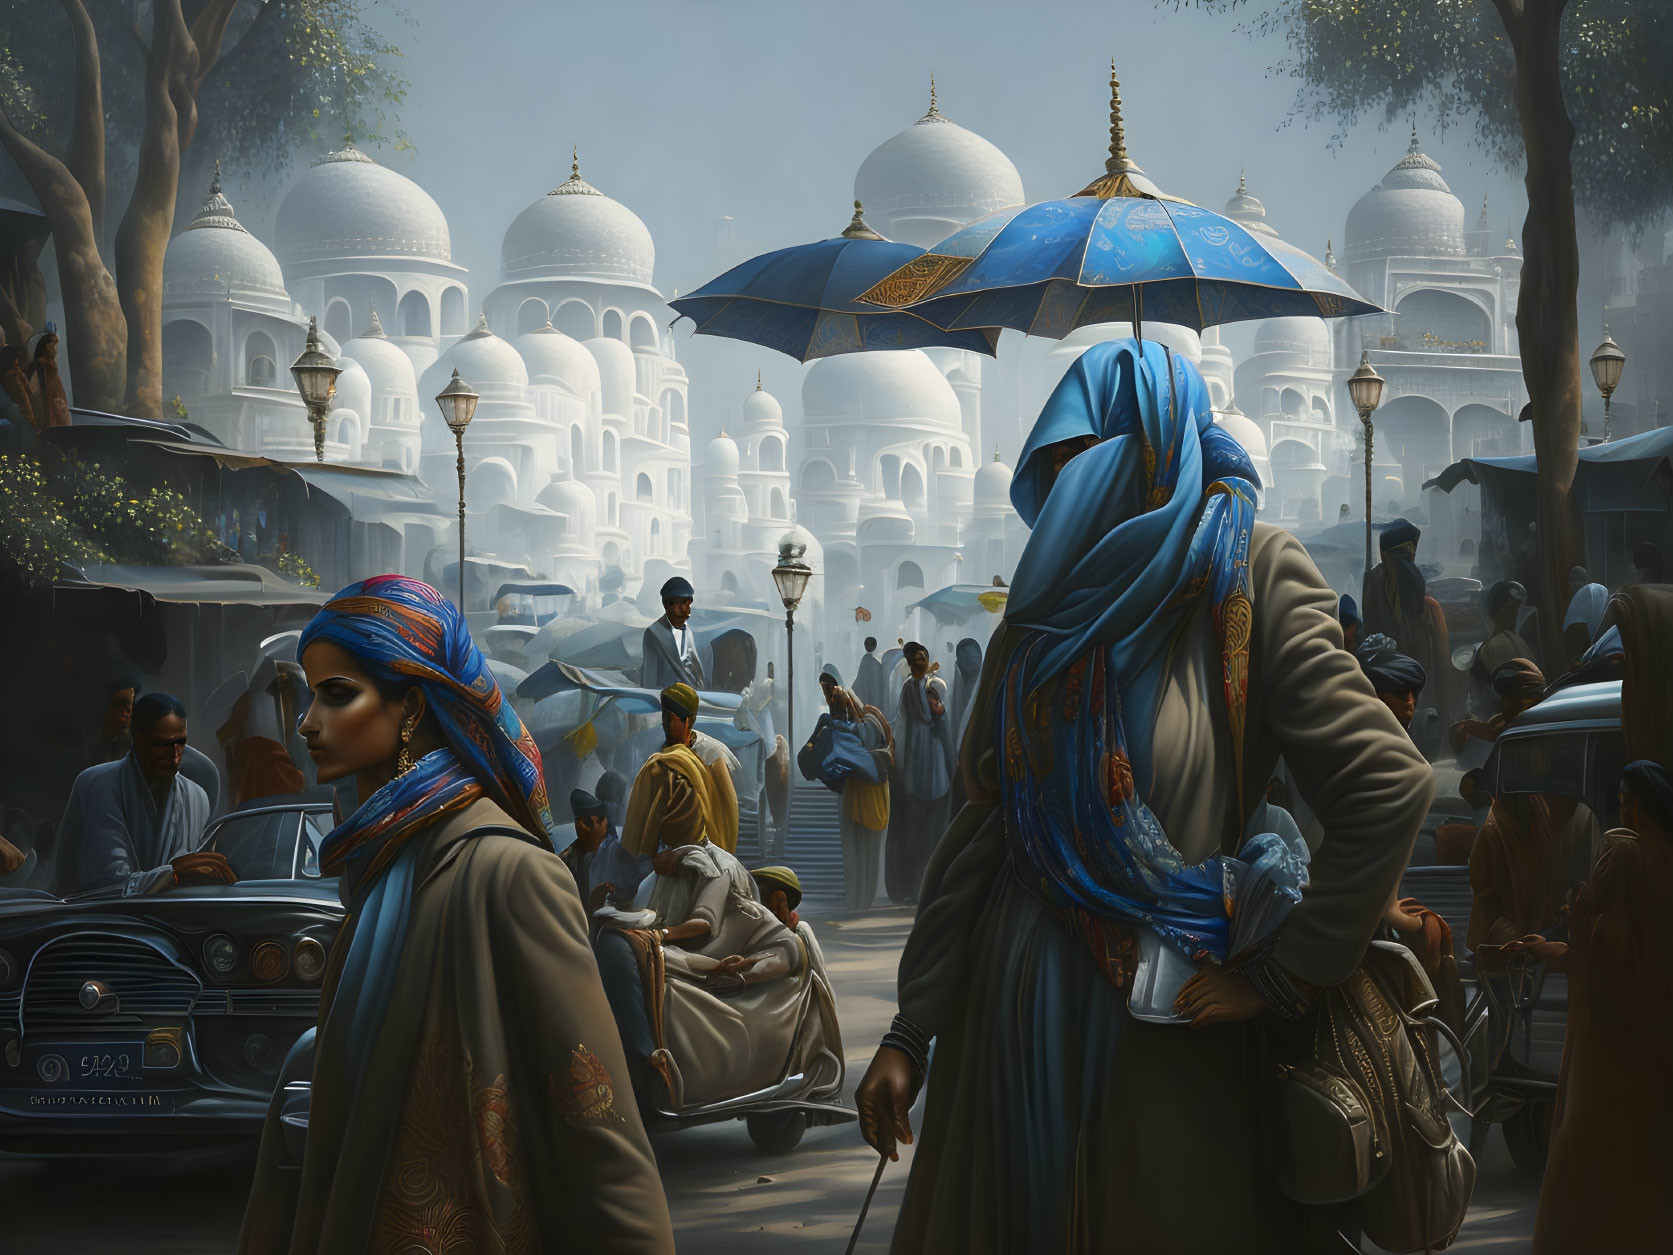 Two women in blue scarves at bustling marketplace with white domed buildings.